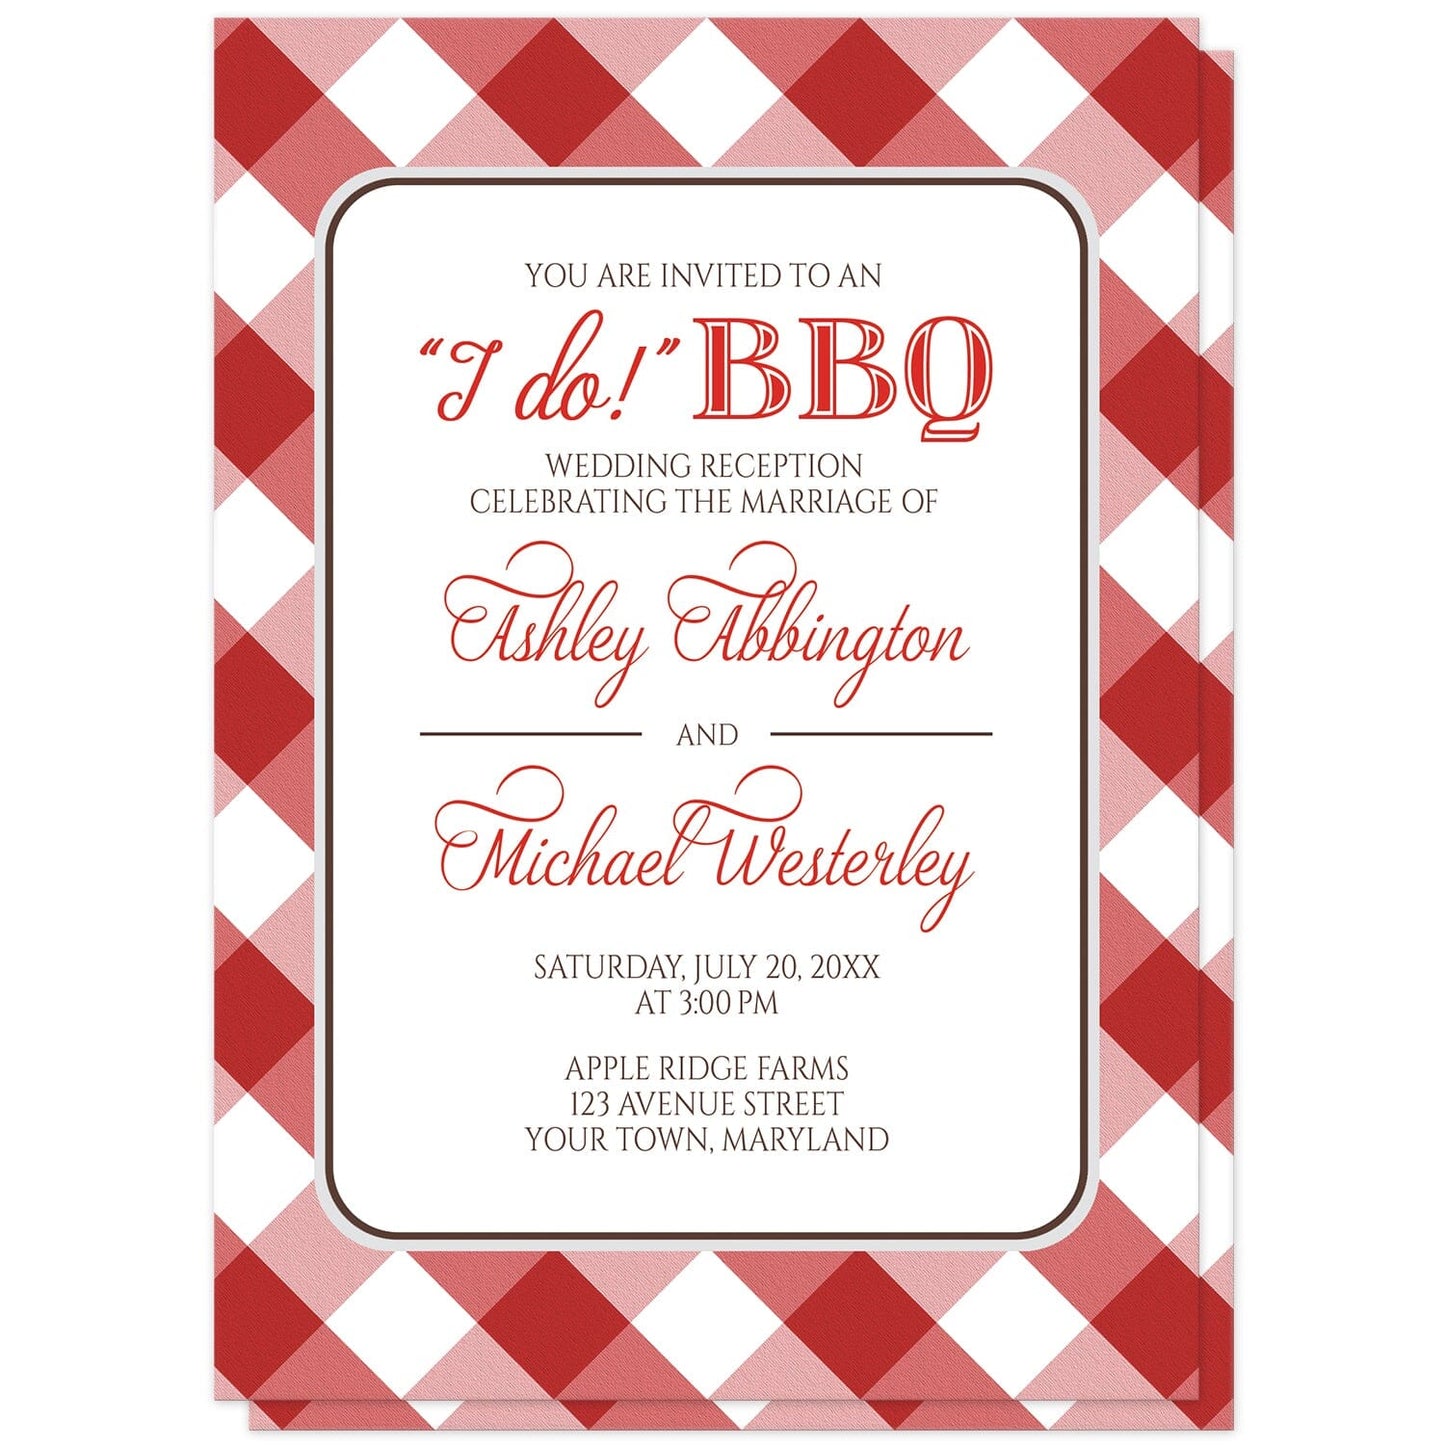 Red Gingham I Do BBQ Reception Only Invitations at Artistically Invited. Red gingham I Do BBQ reception only invitations with your personalized post-wedding reception details custom printed in red and brown inside a white rectangular area outlined in brown and light gray. The background design is a diagonal red and white gingham pattern which is also printed on the back side. 